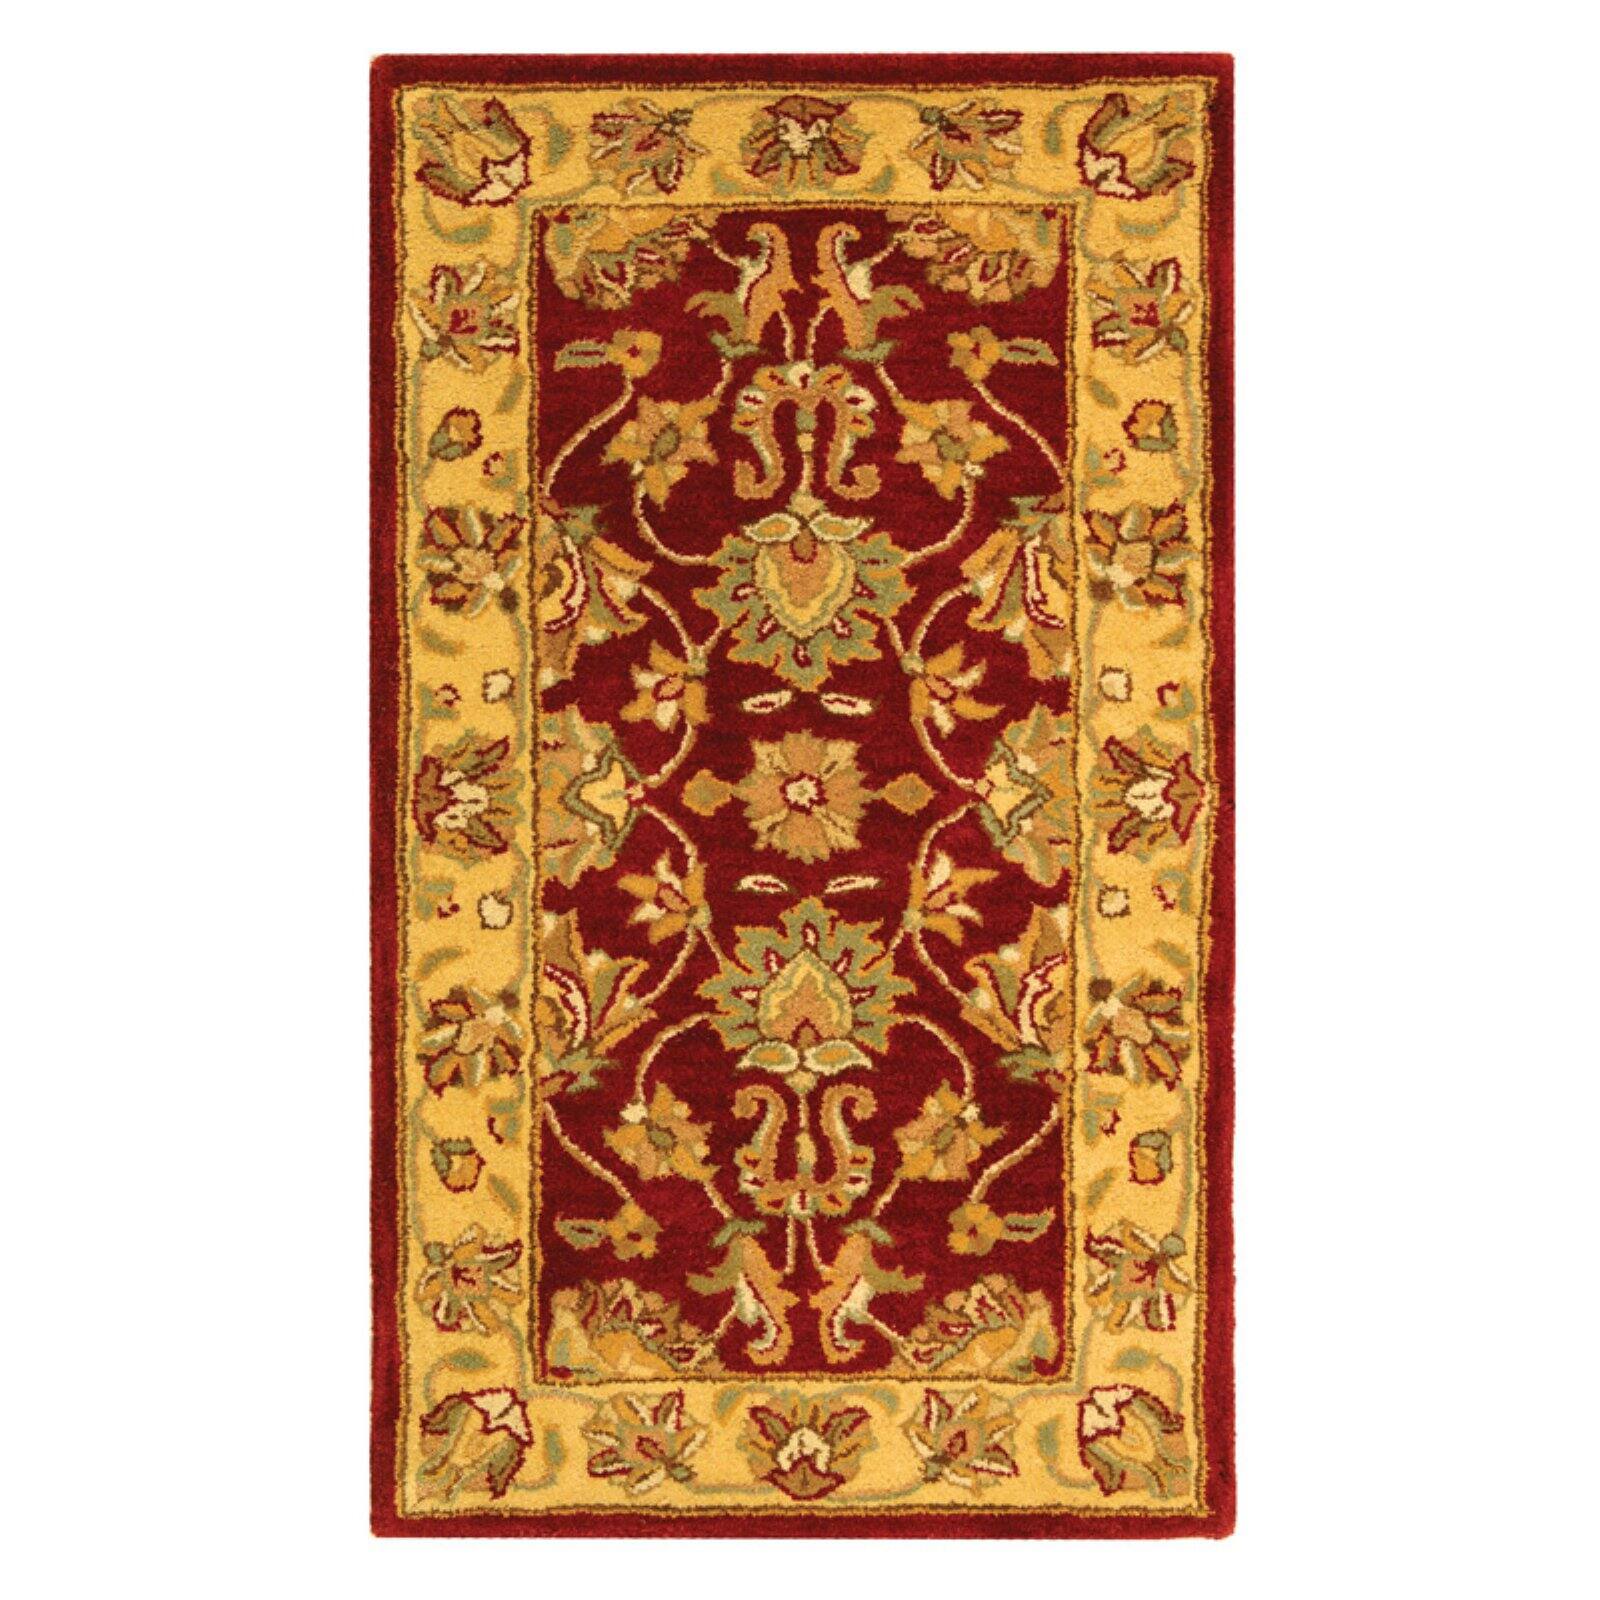 SAFAVIEH Heritage Regis Traditional Wool Area Rug, Red/Gold, 7'6" x 9'6" Oval - image 2 of 9